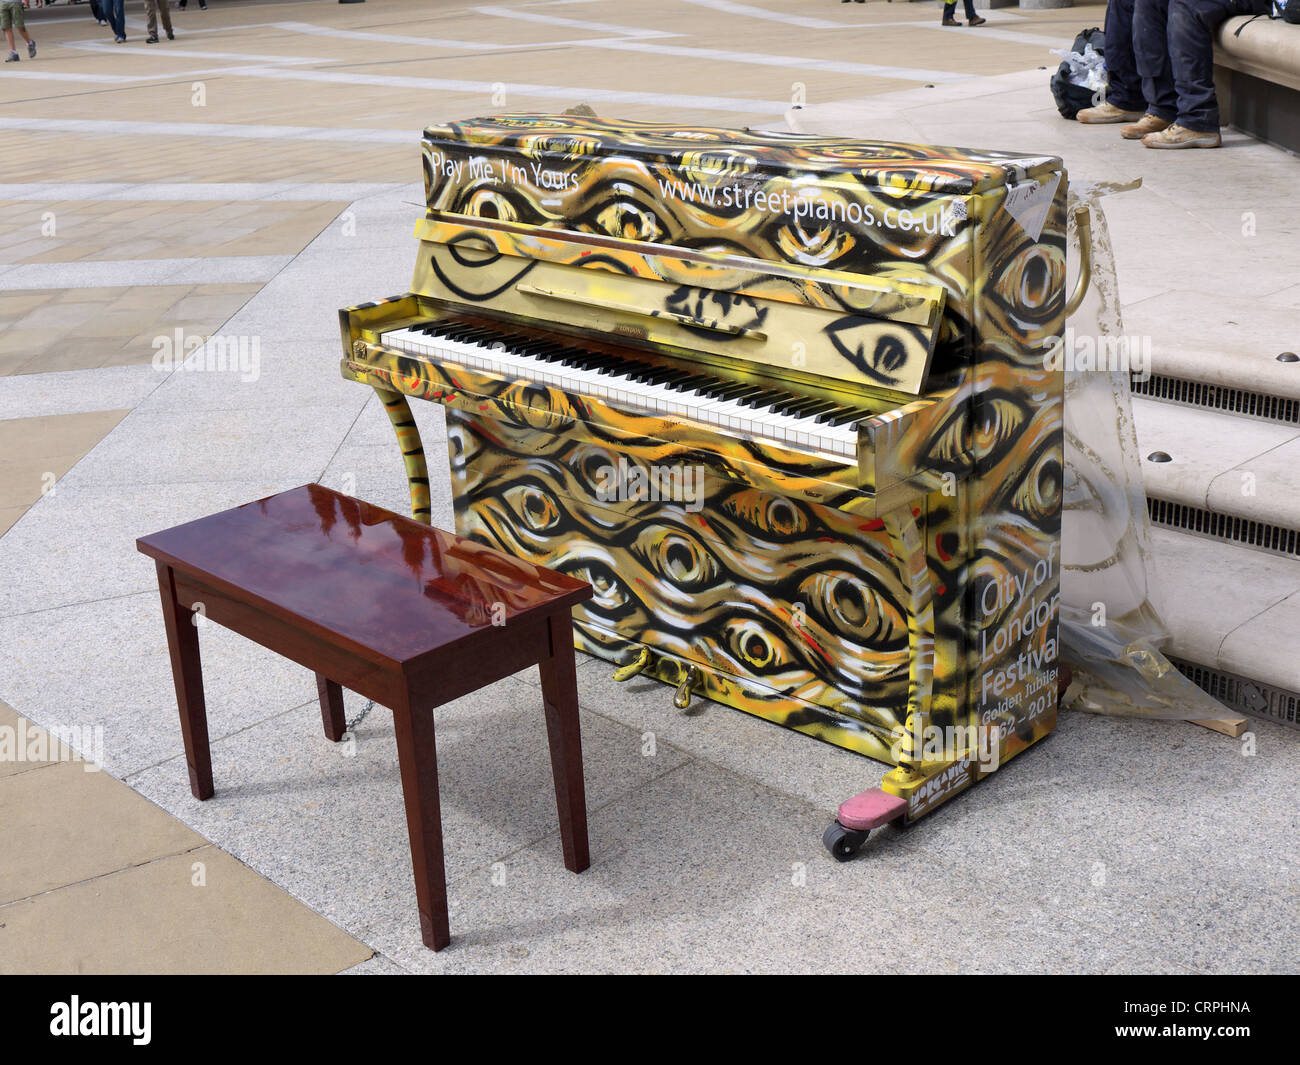 A streetpiano waiting to be played by a member of the public in London Stock Photo